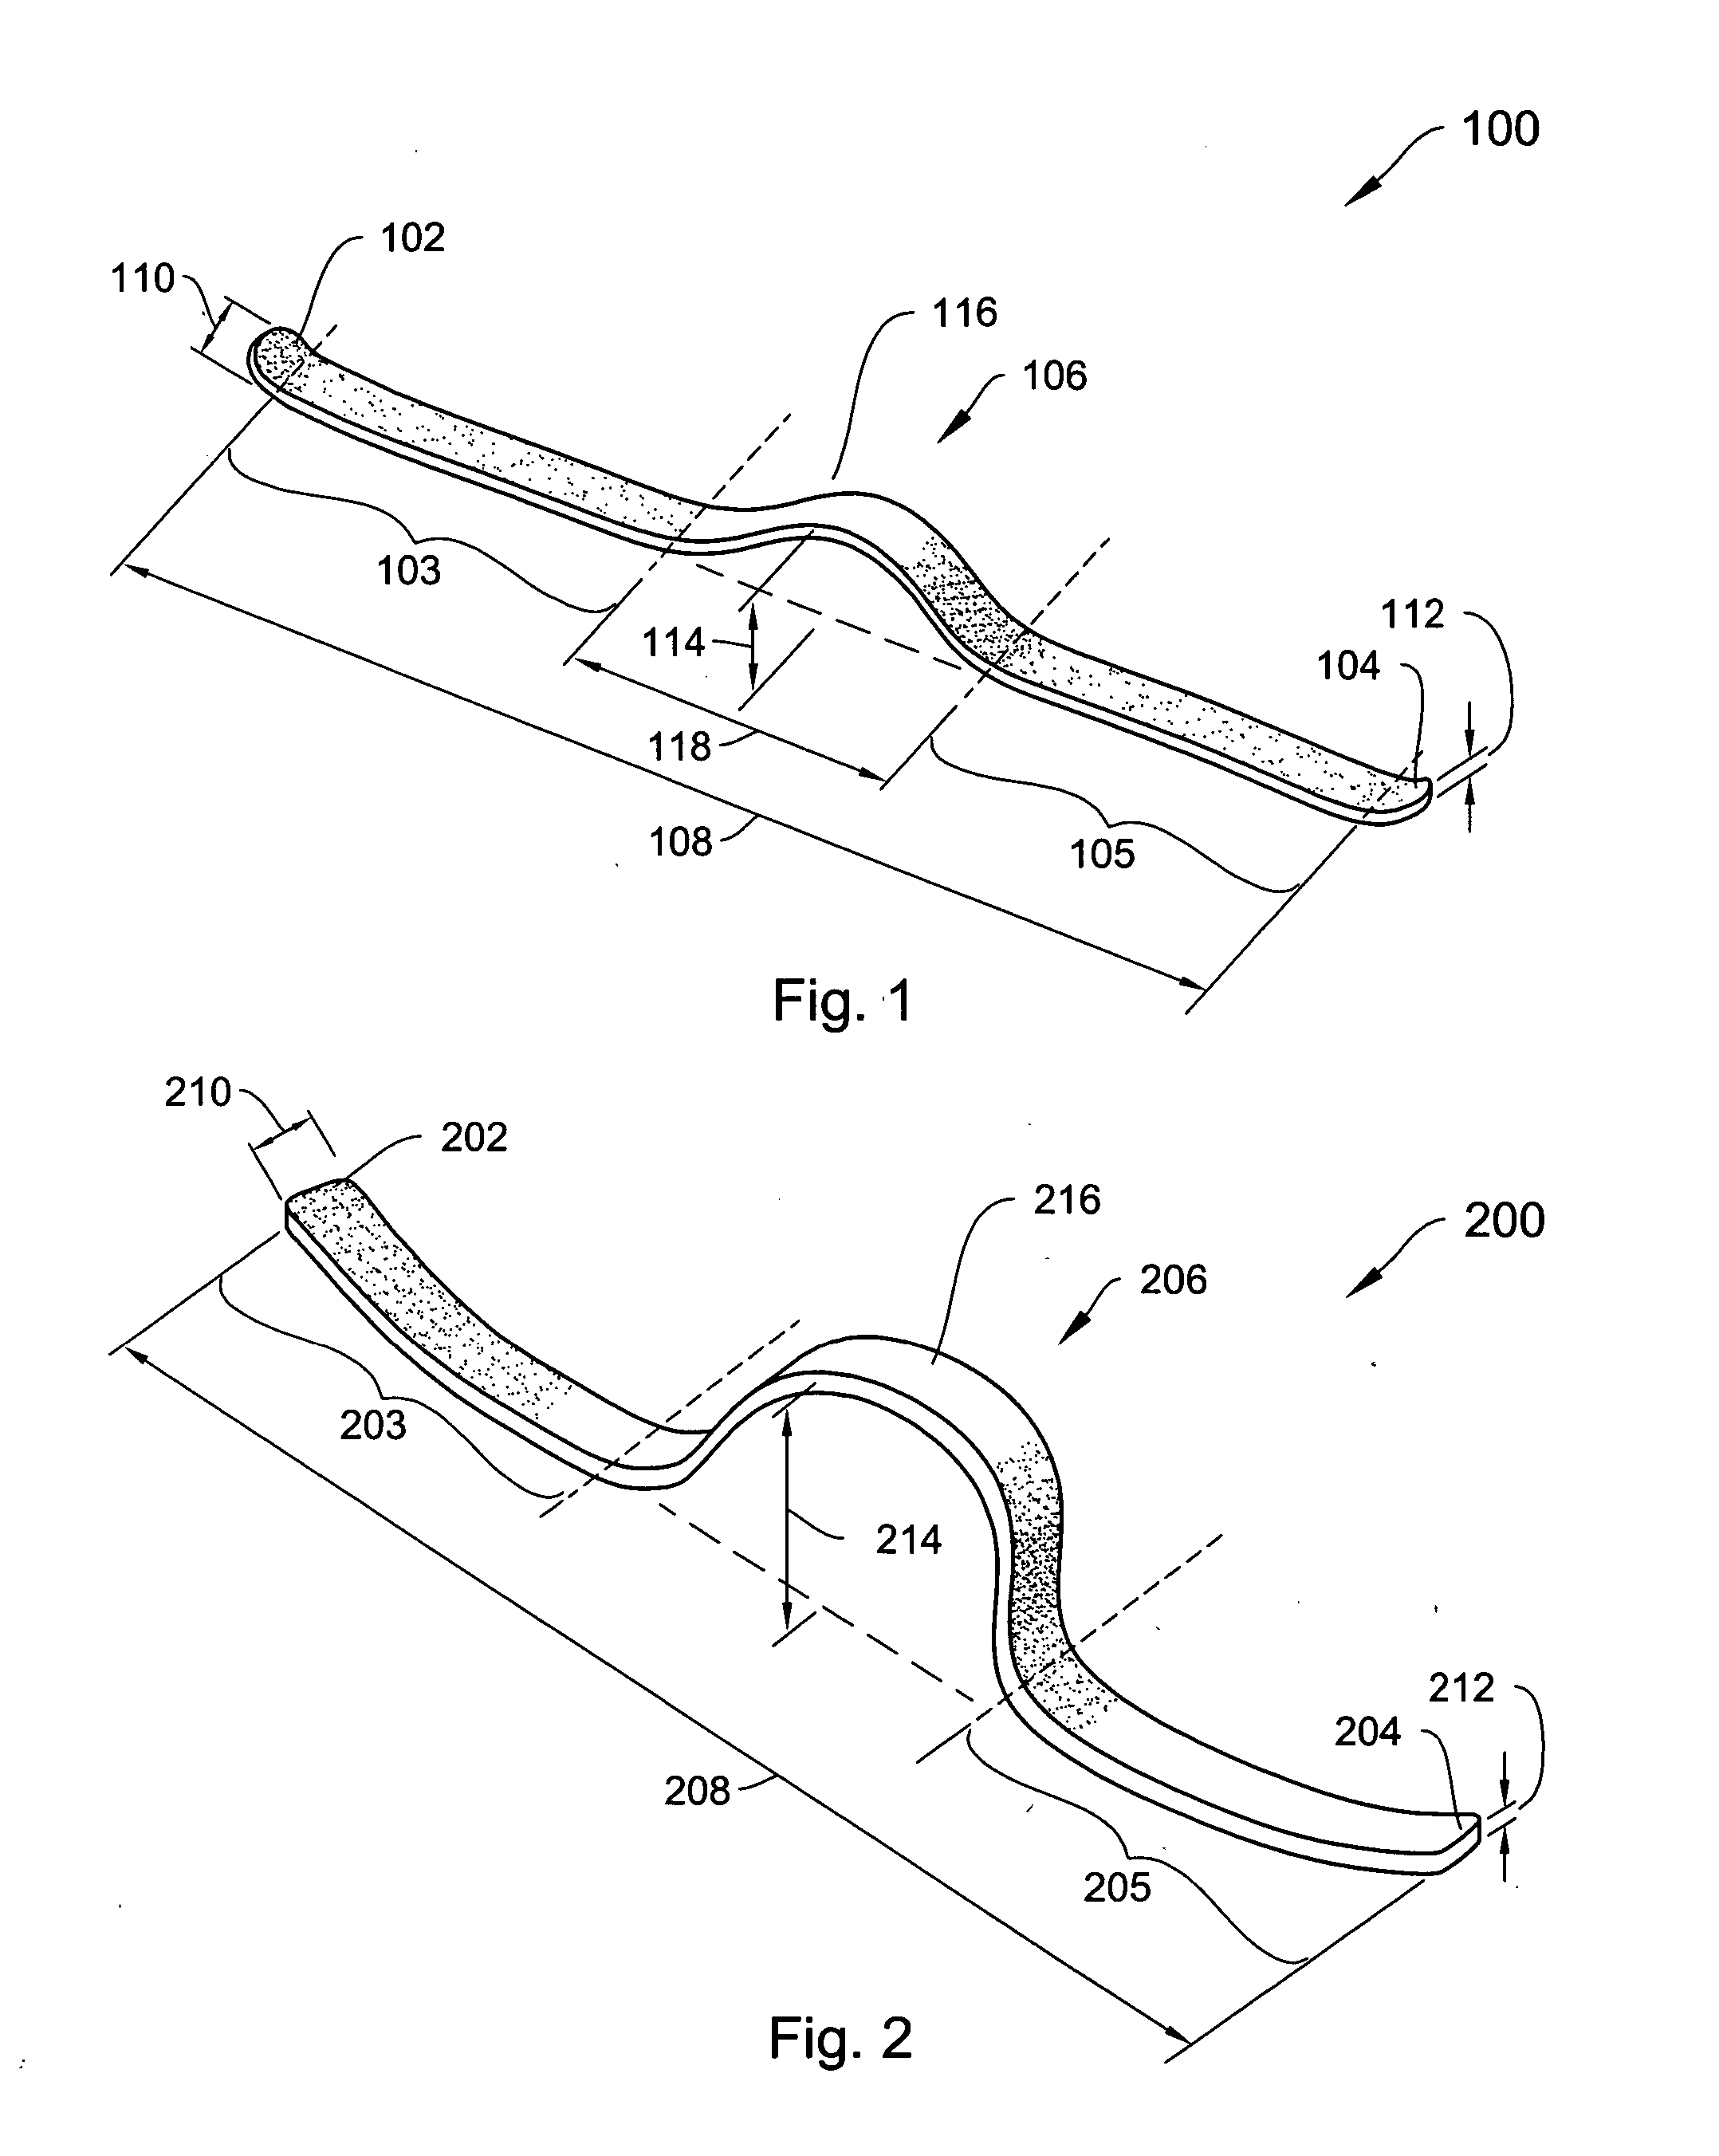 Systems, devices and methods relating to a shape resilient sling-like support for treating urinary incontinence